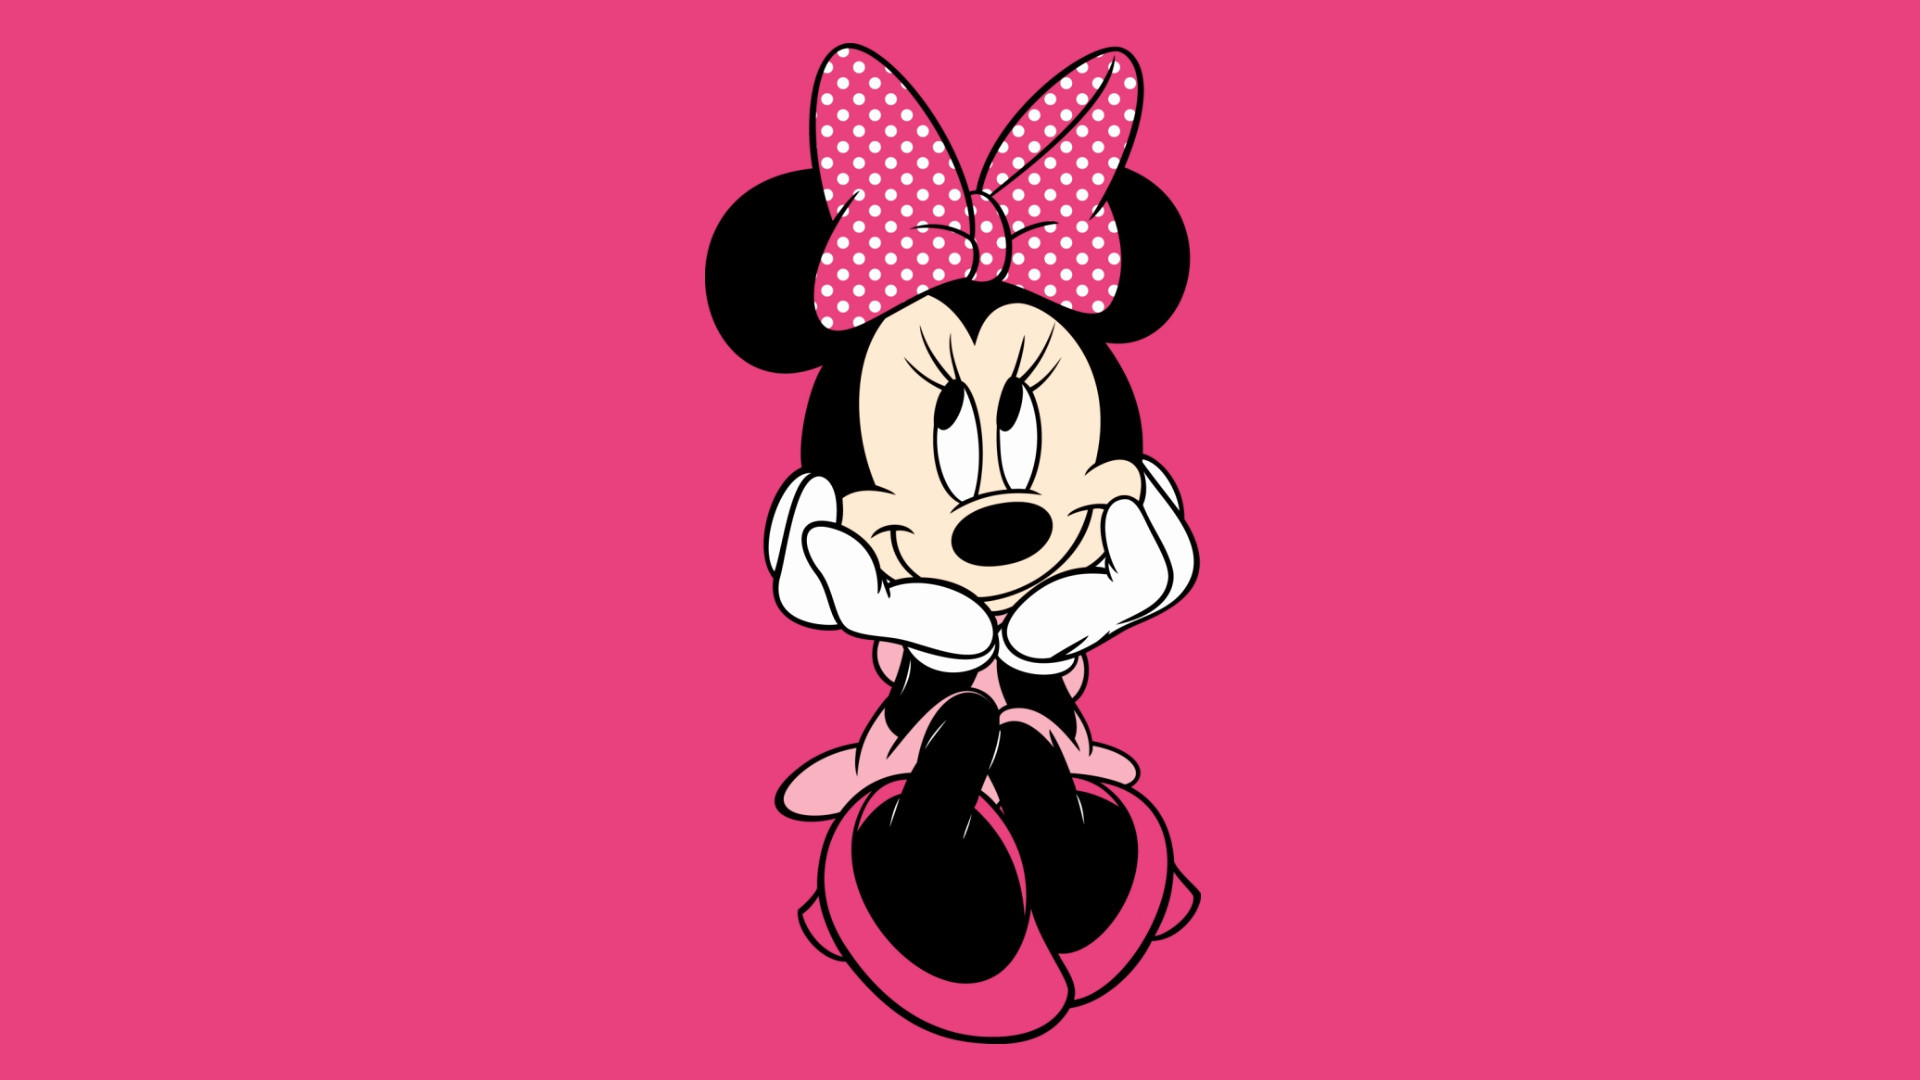 1920x1080 Minnie mouse wallpaper Gallery| Beautiful and Interesting  Images,Vectors,Coloring,Cliparts |Free Hd wallpapers